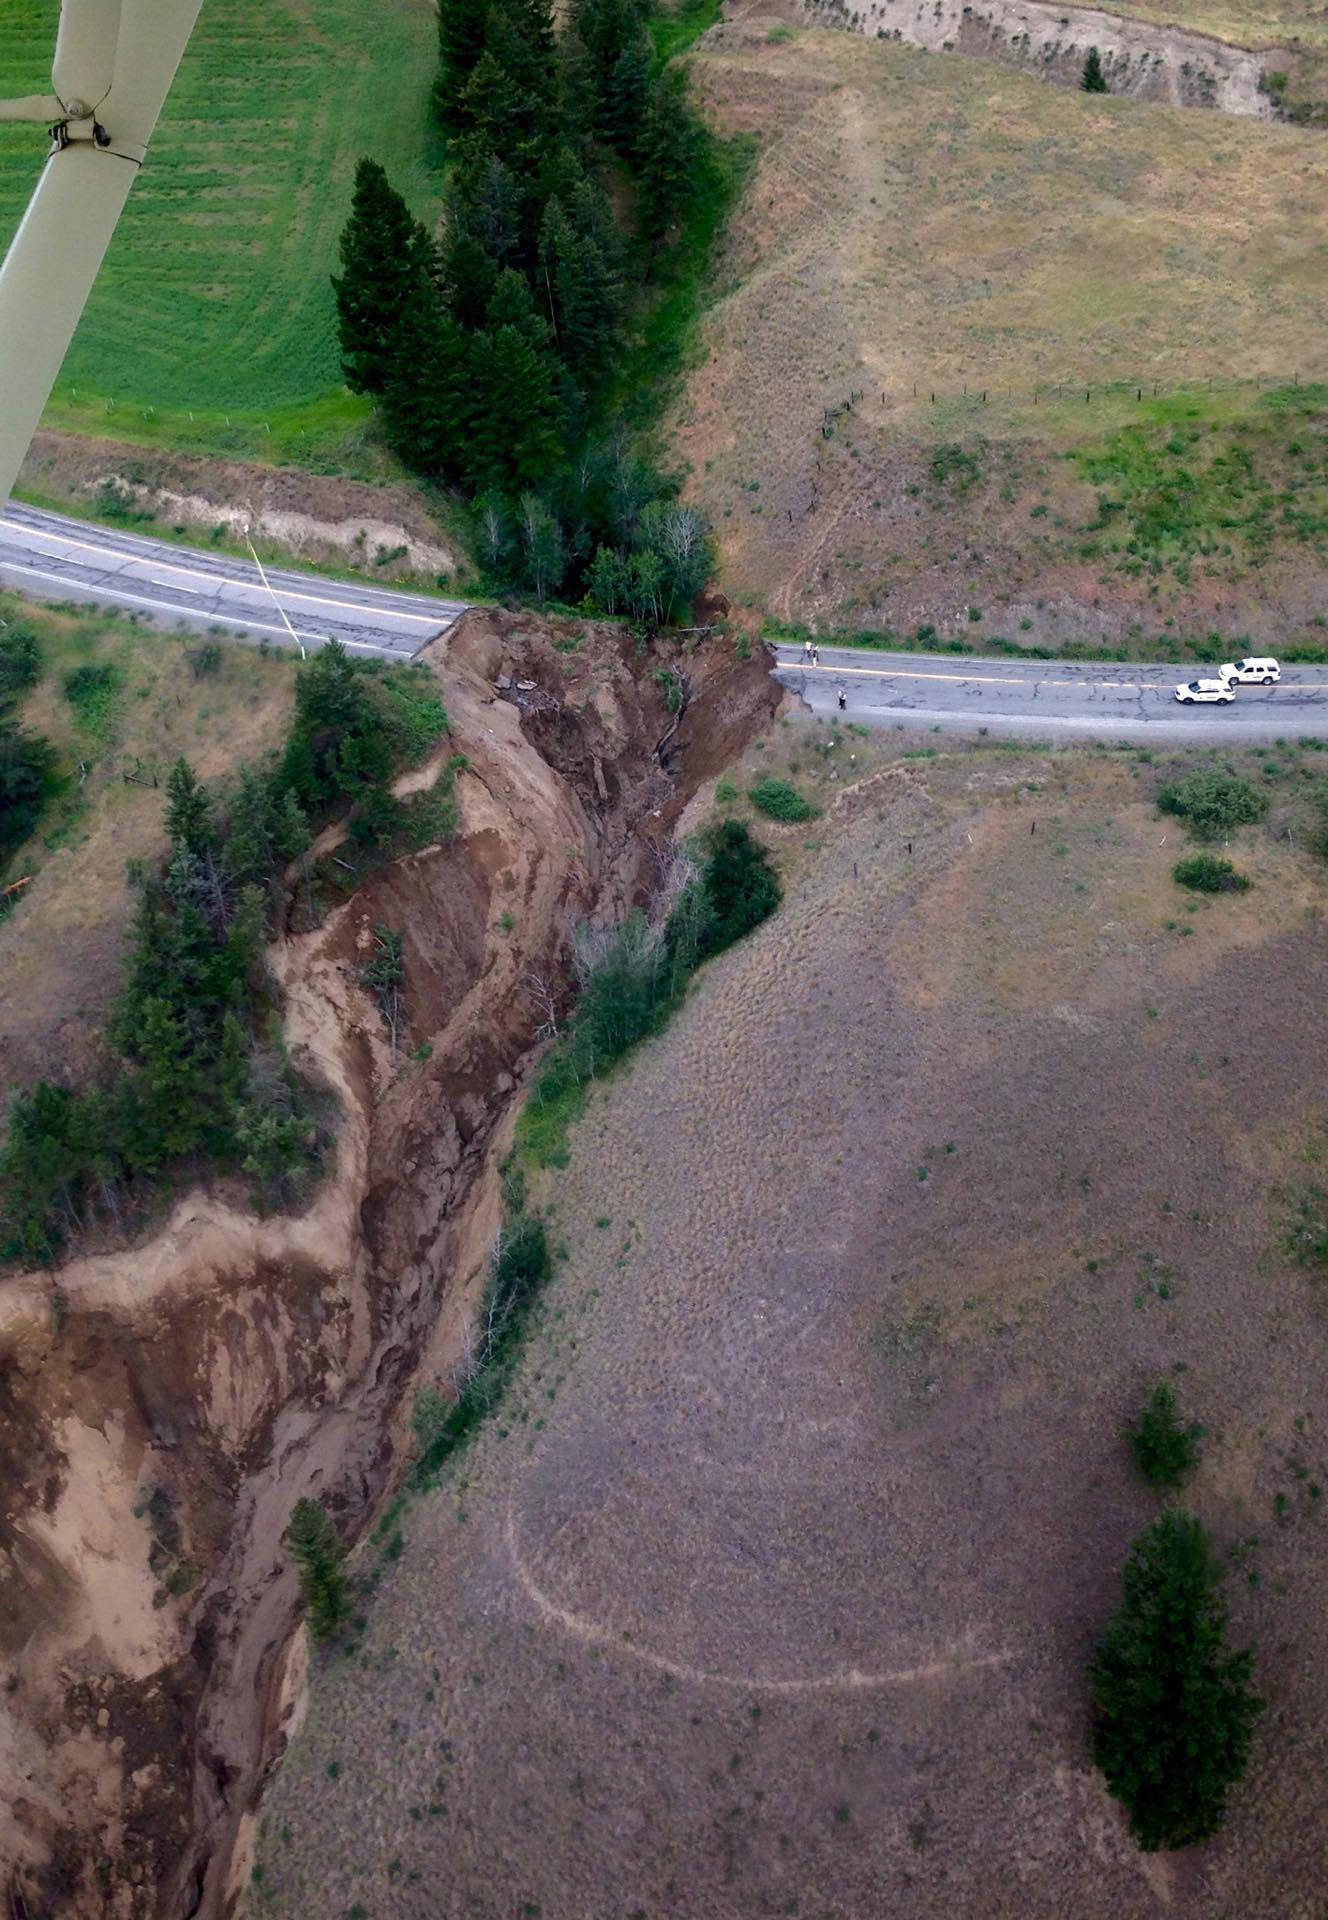 Incredible aerial photos of B.C. highway washout that sent man to hospital